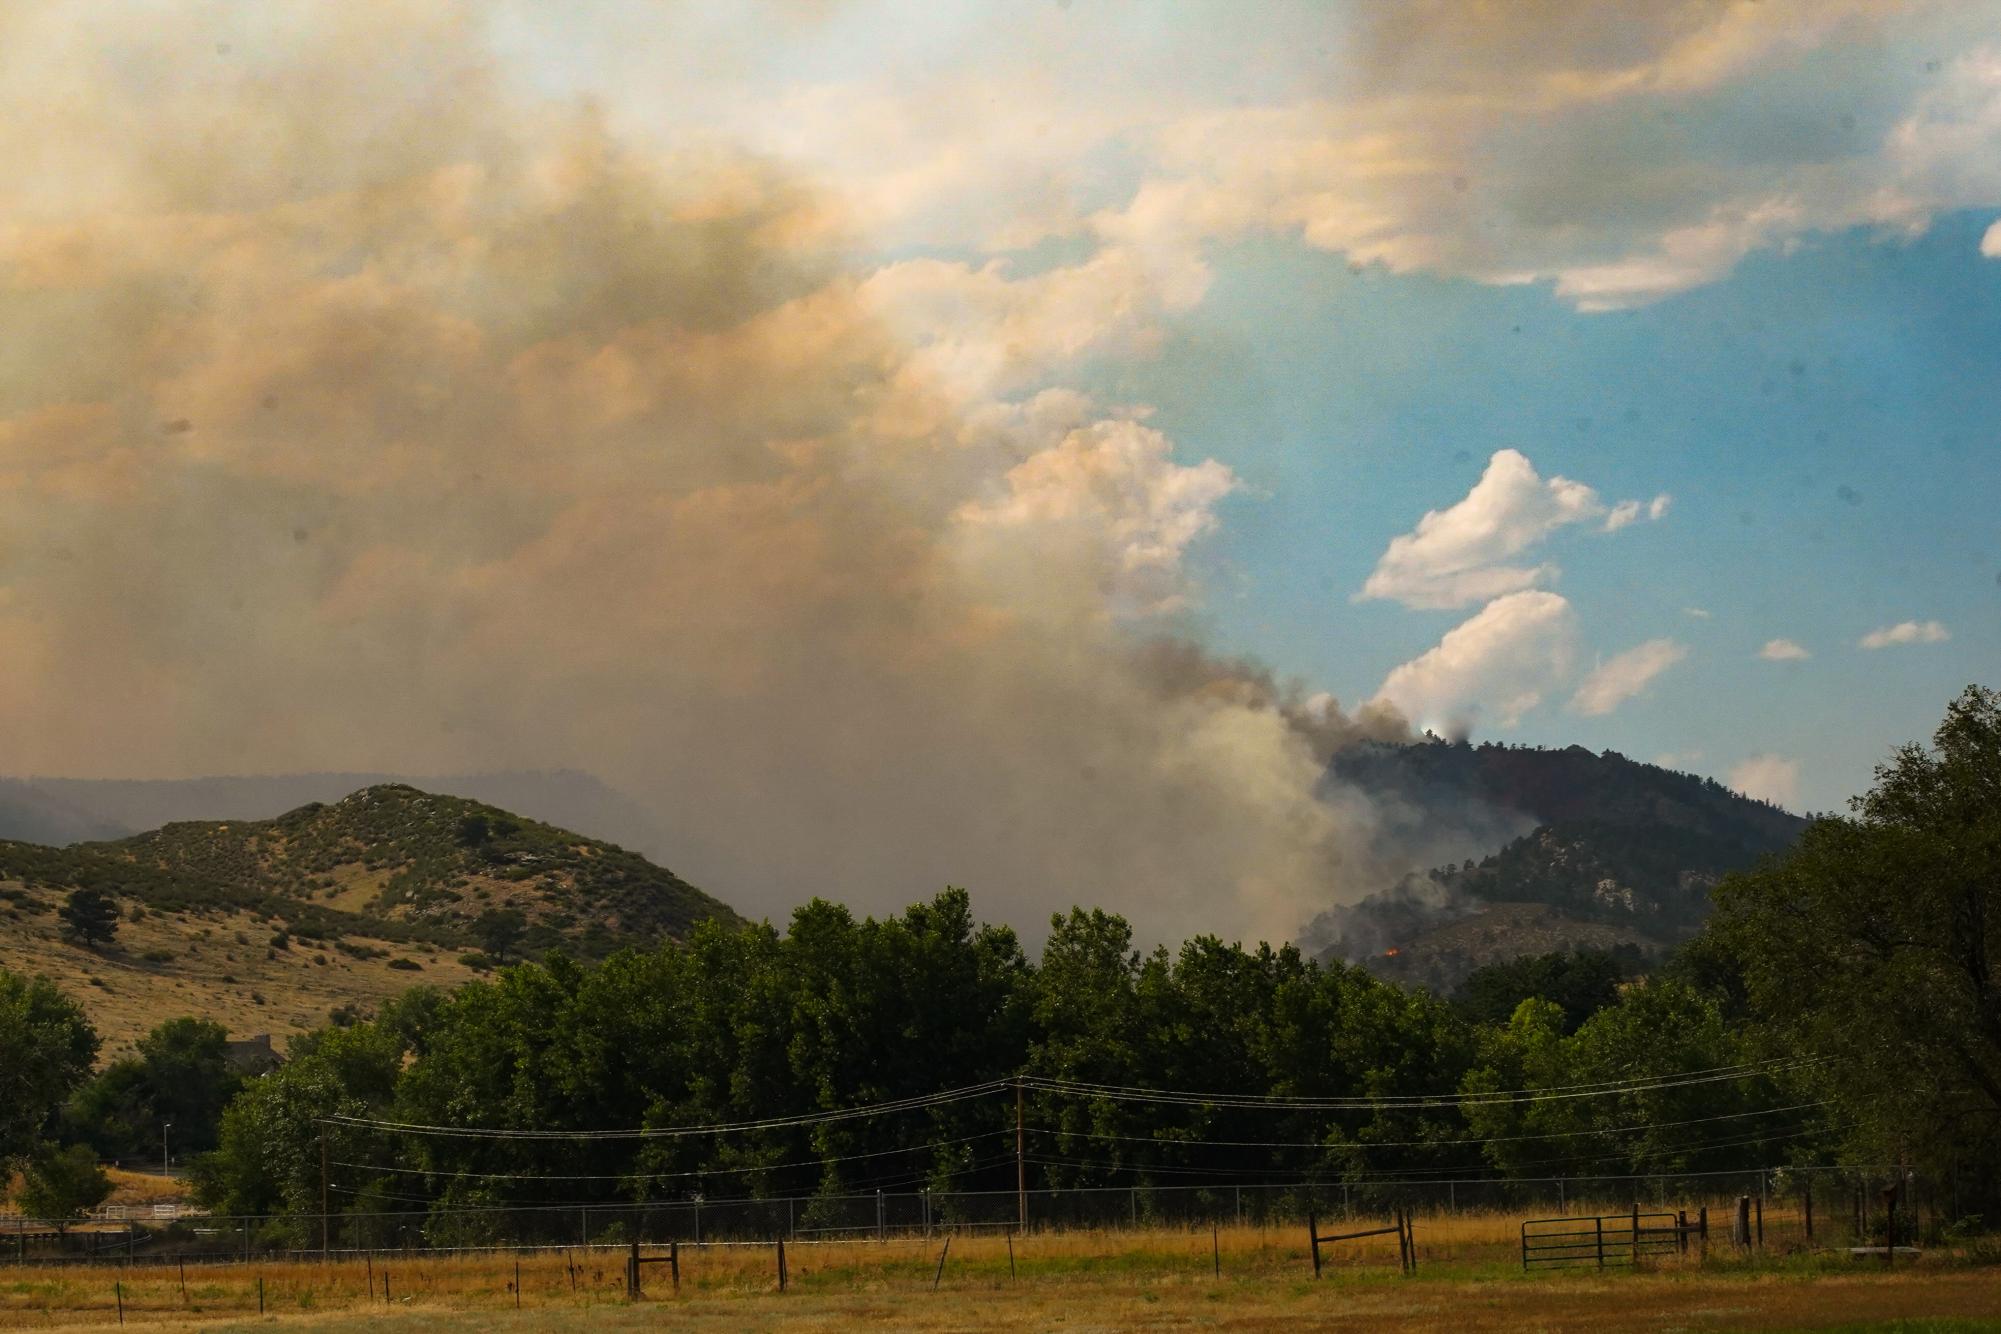 Gallery%3A+Alexander+Mountain+Fire+as+seen+from+Larimer+County%2C+Fort+Collins